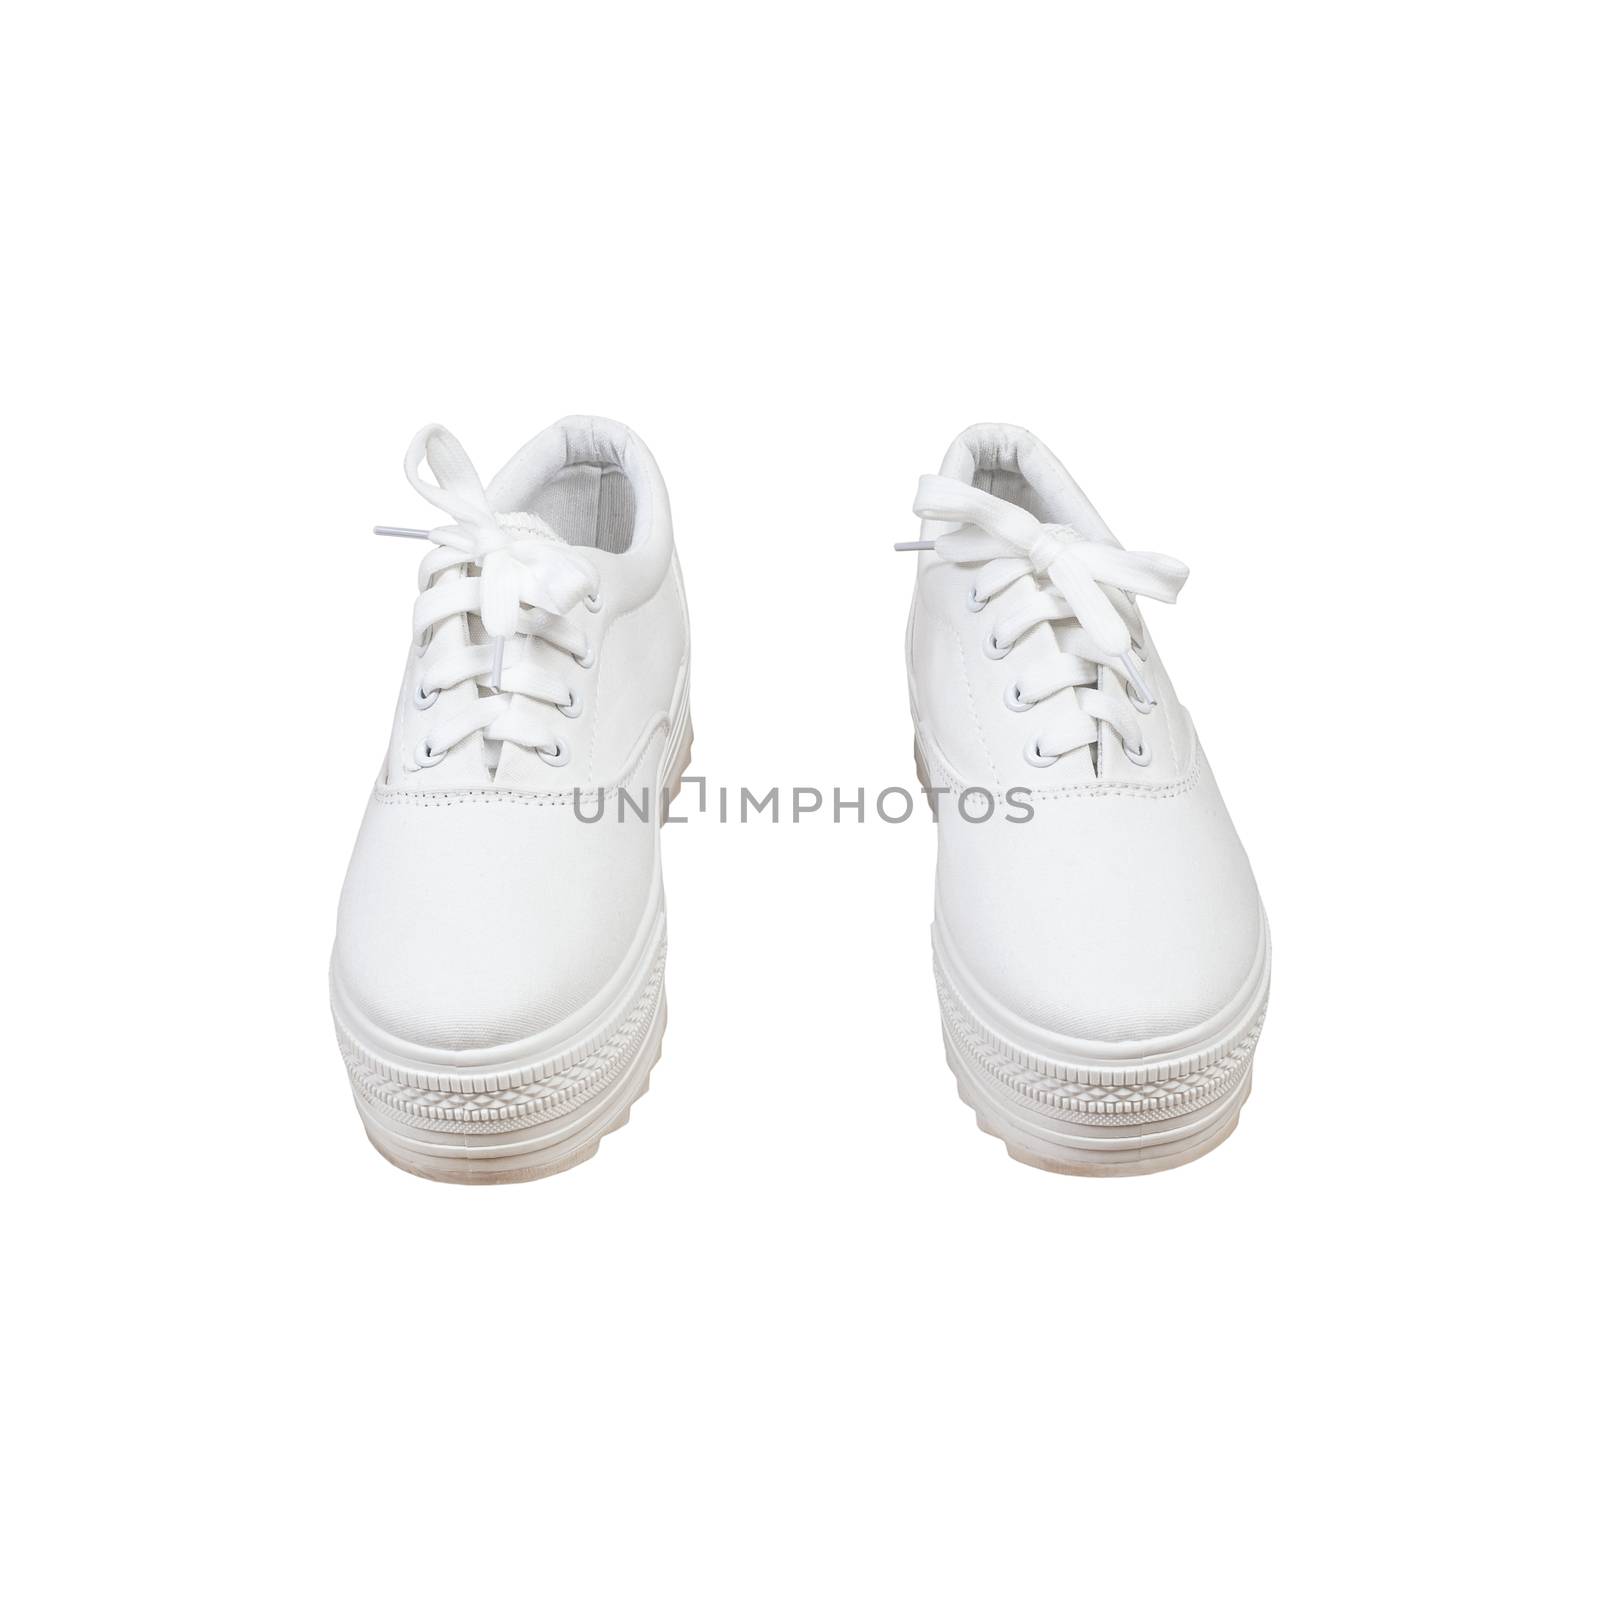 Pair sneakers, white color isolated background